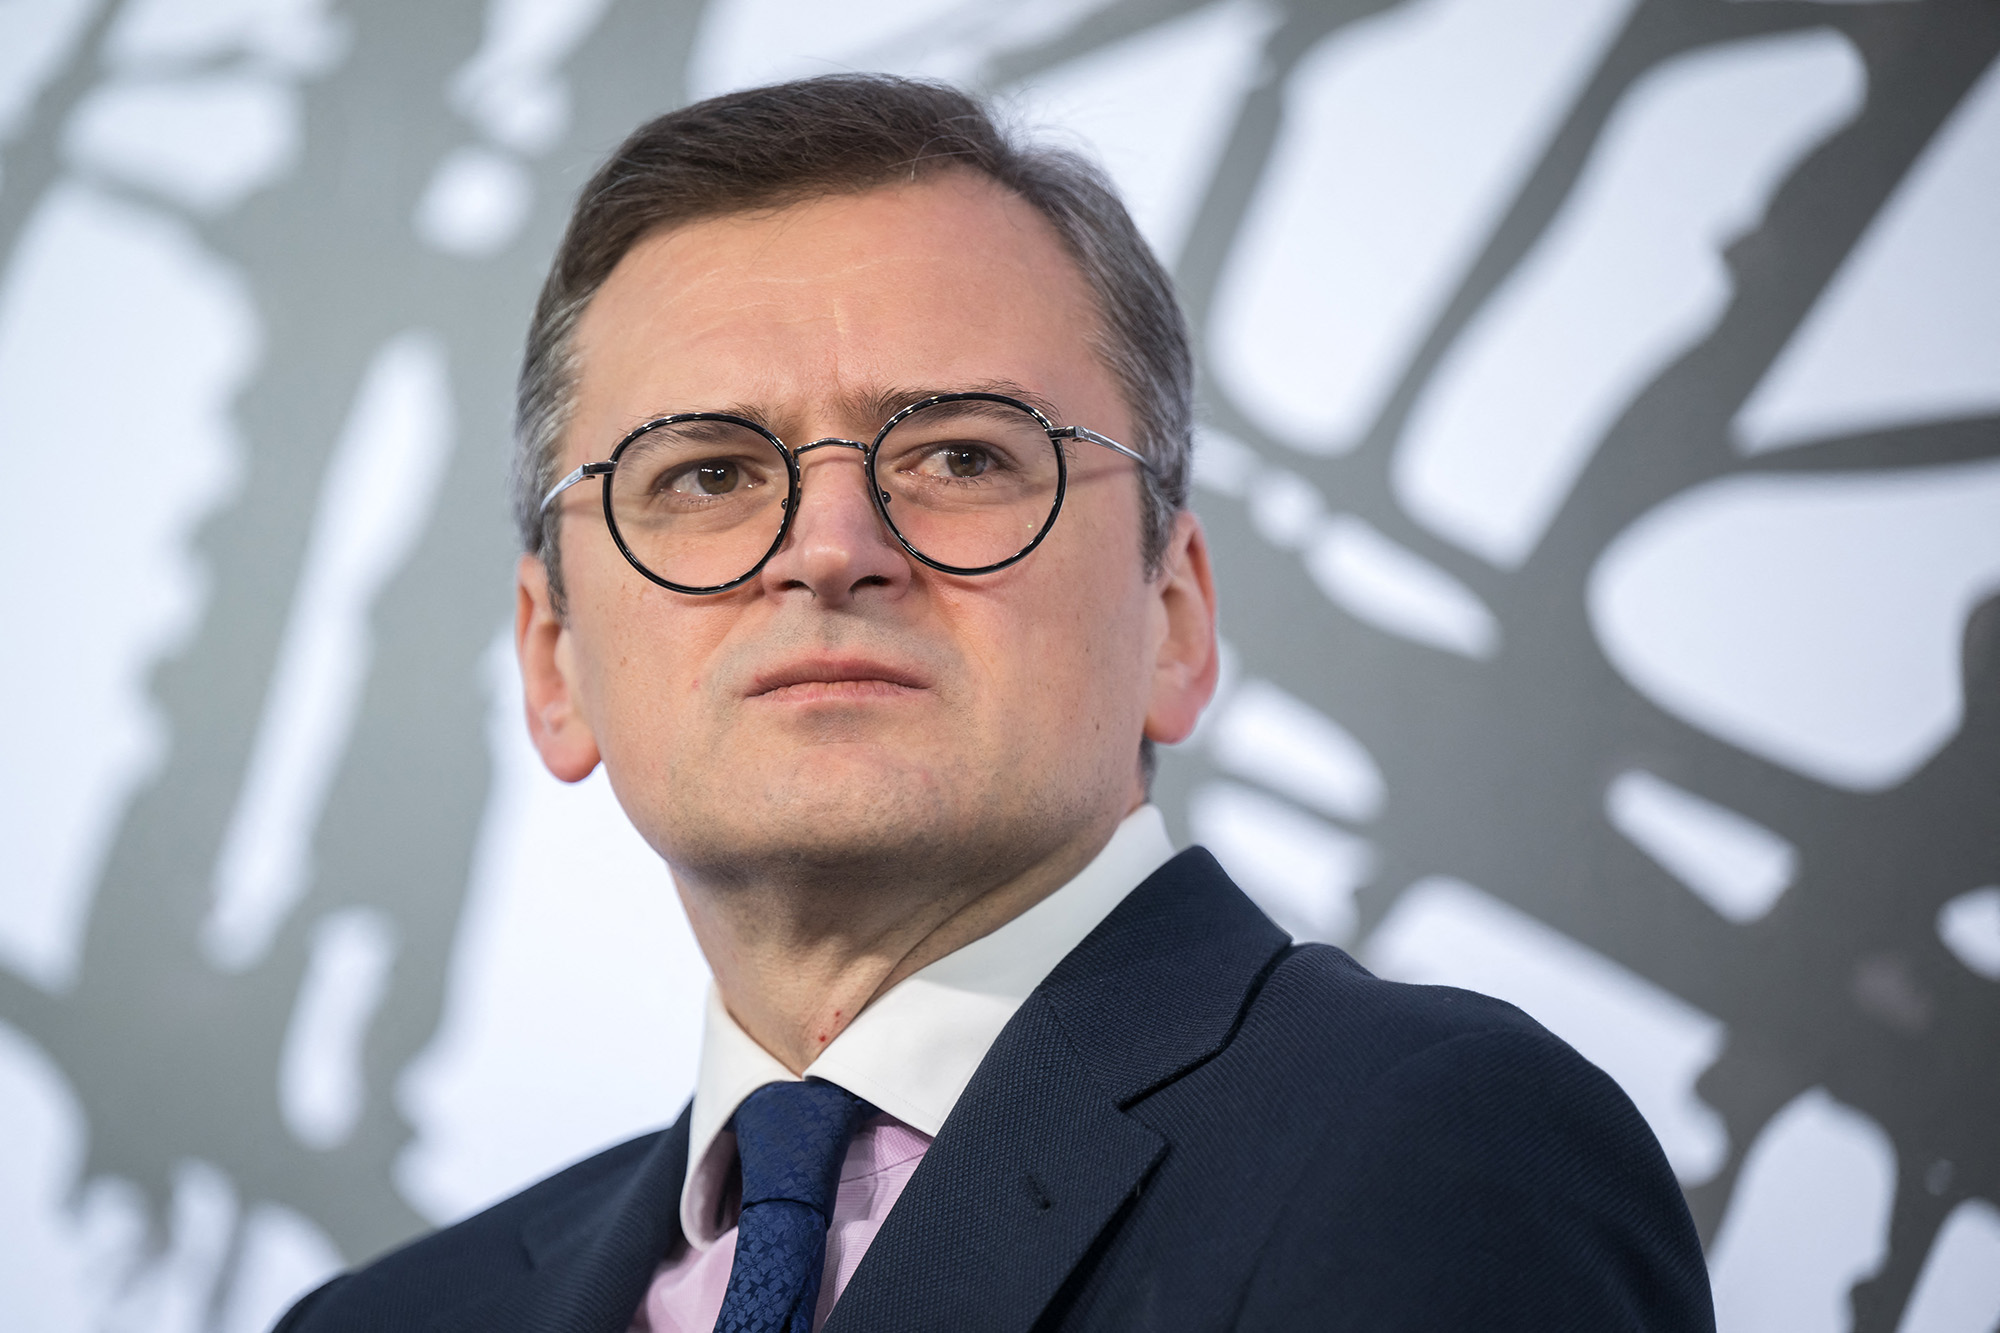 Ukraine's Foreign Minister Dmytro Kuleba attends the World Economic Forum (WEF) meeting in Davos, Switzerland, on January 18.